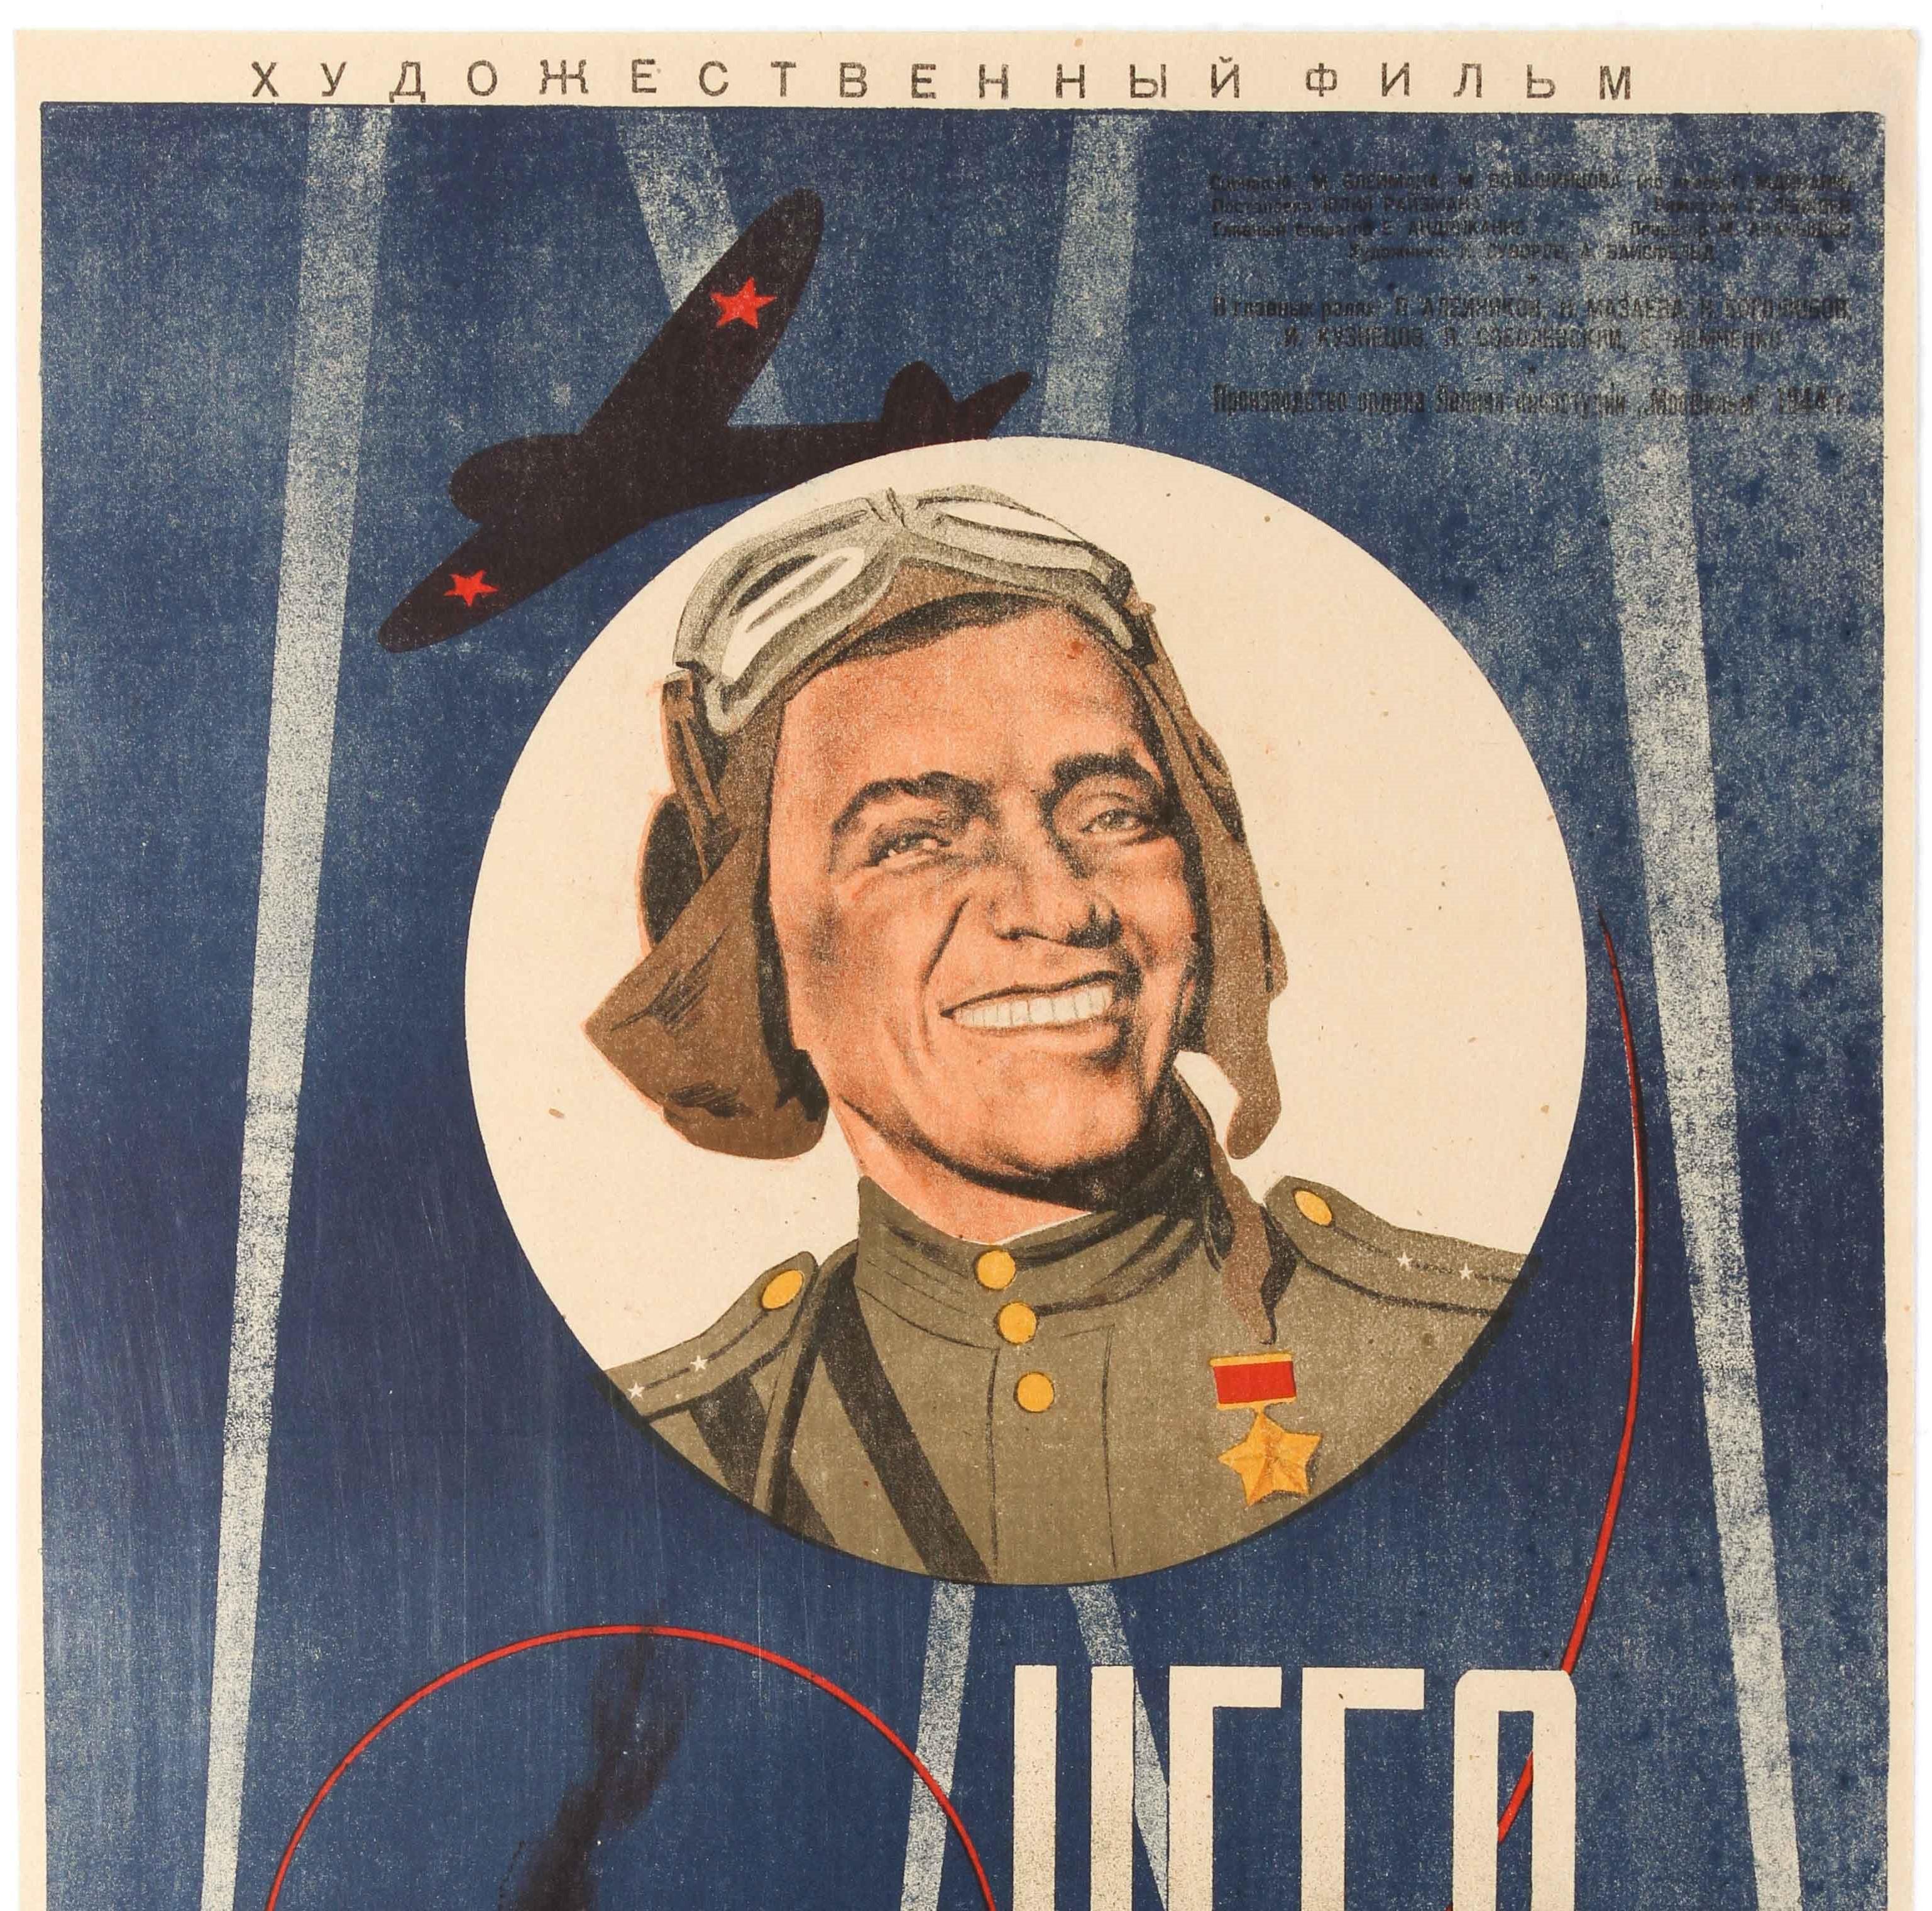 Original vintage Soviet movie poster for a World War Two film Moscow Skies / Nebo Moskvy / ???? ?????? based on the story of a fighter pilot hero during the Great Patriotic War air defence of Moscow in 1941, directed by Yuli Raizman and starring